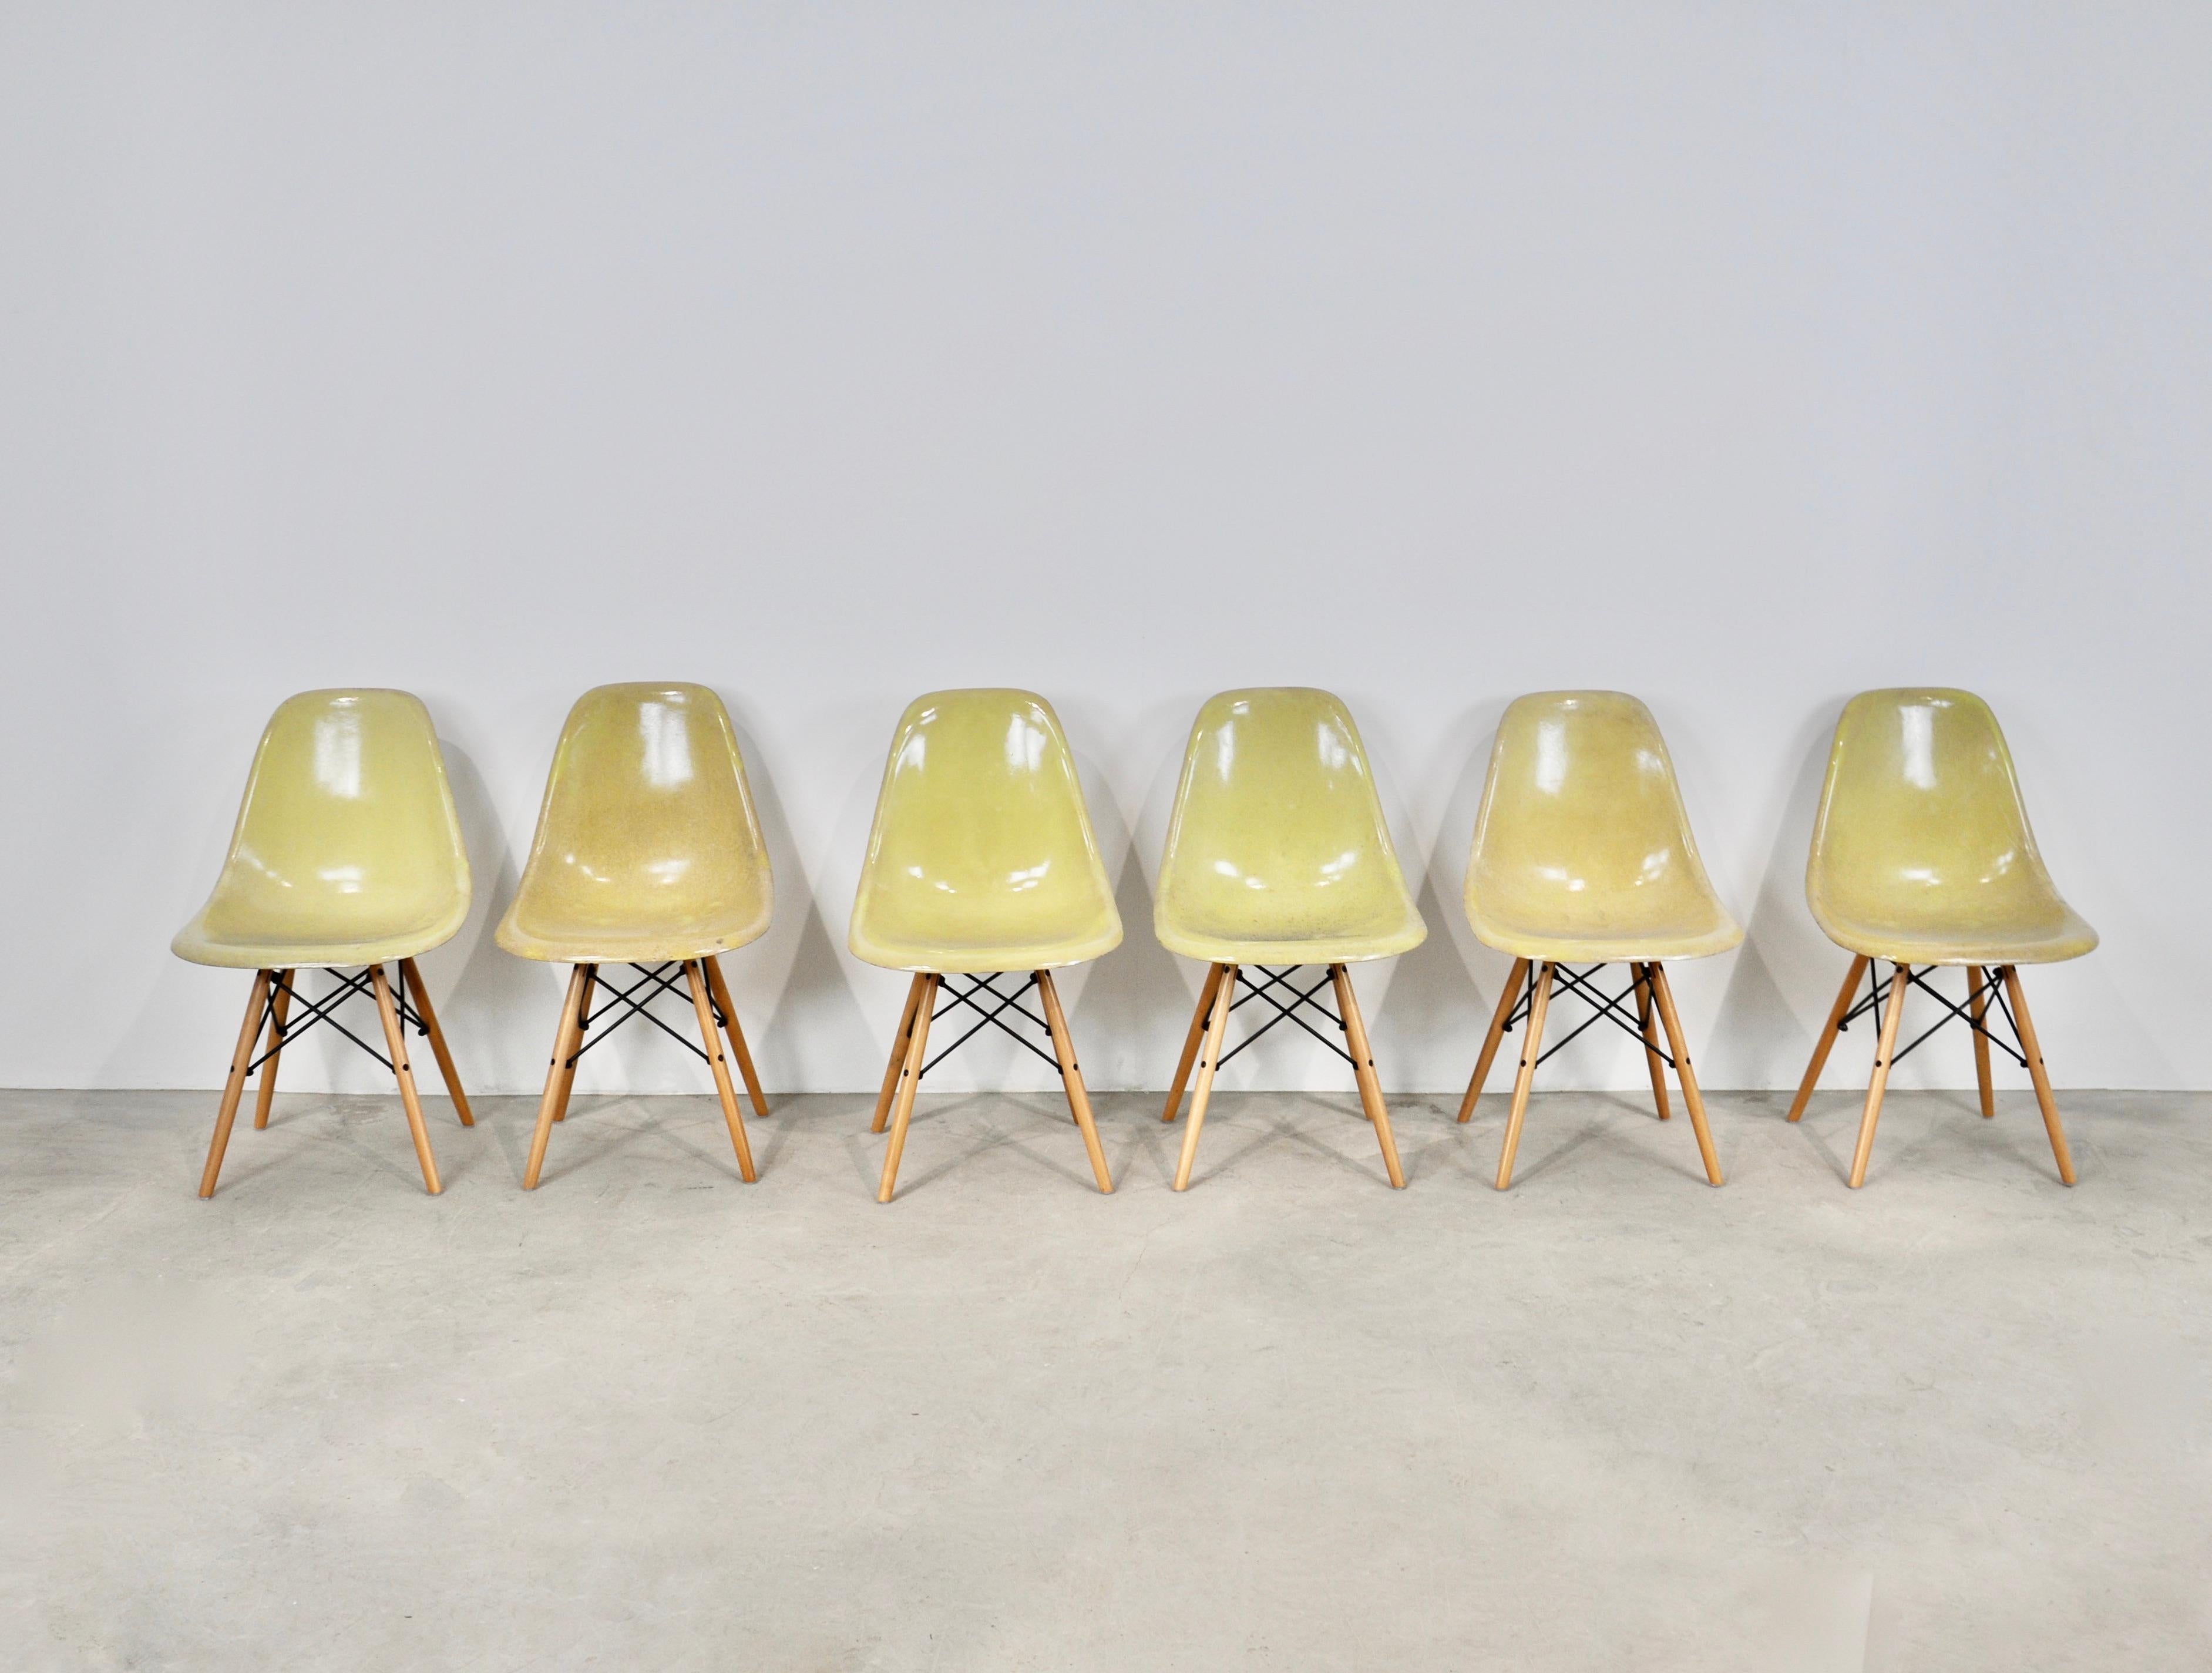 Set of 6 chairs in yellow fiberglass. Stamped Herman Miller (see photo). The legs had to be changed because old in bad condition.